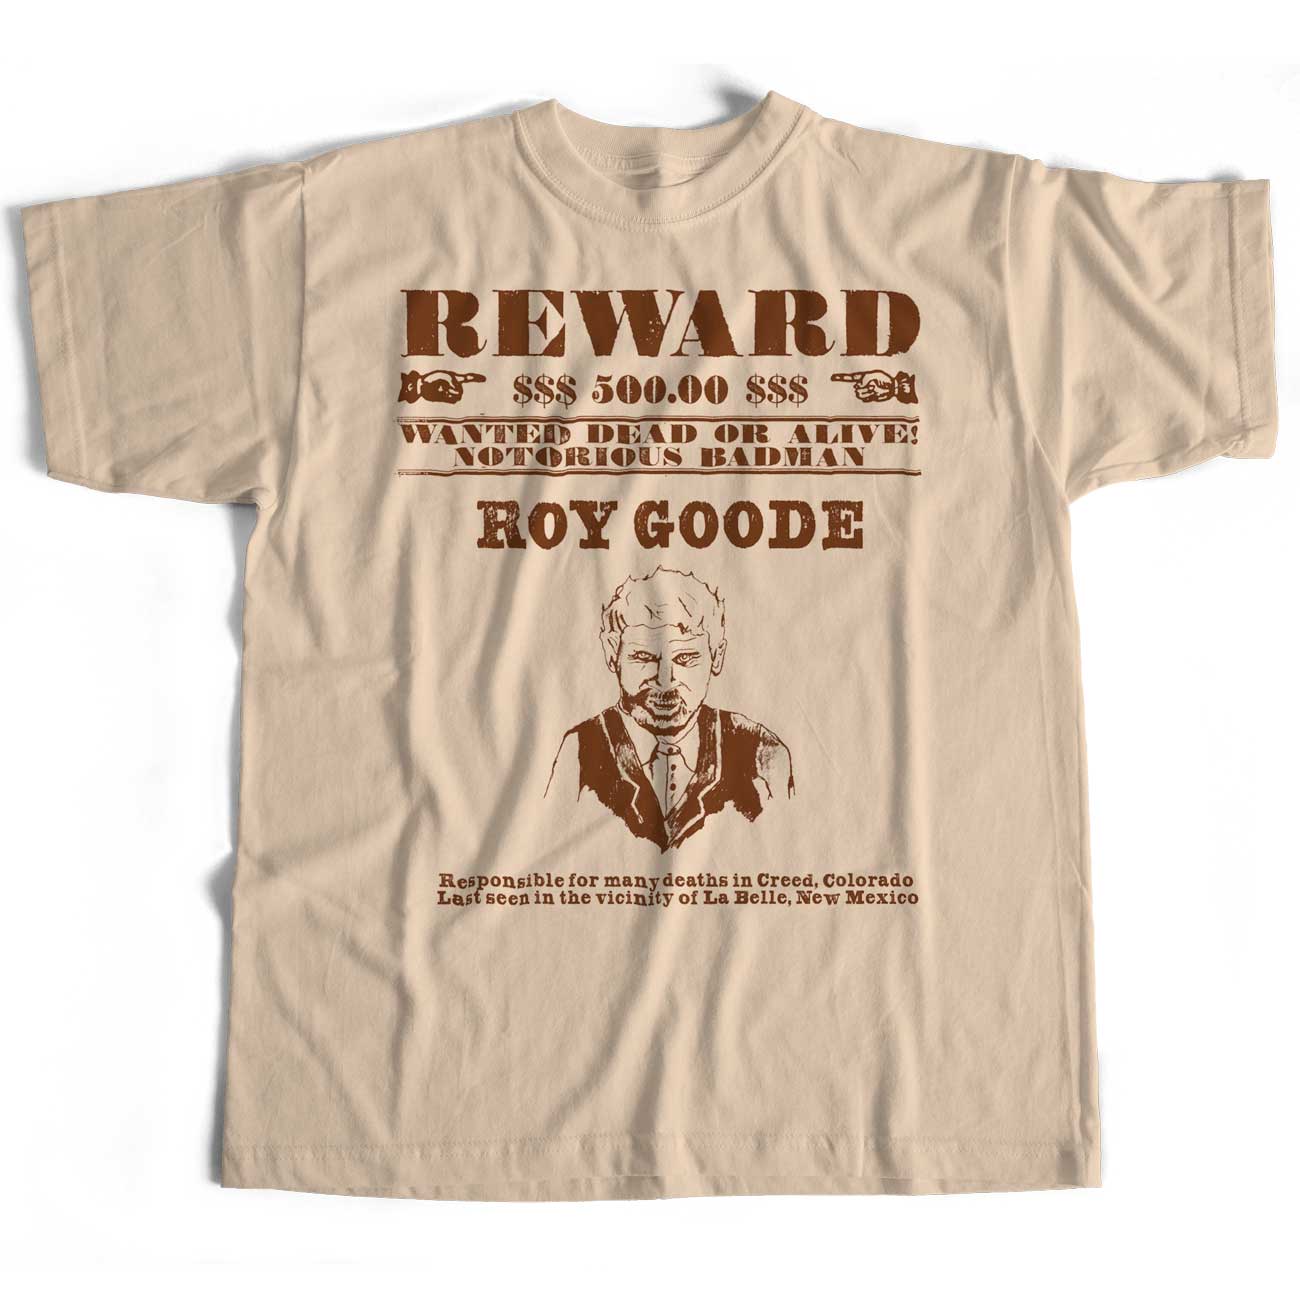 Inspired by Godless T Shirt - Roy Goode Wanted Poster An Old Skool Hooligans Cult TV Tee